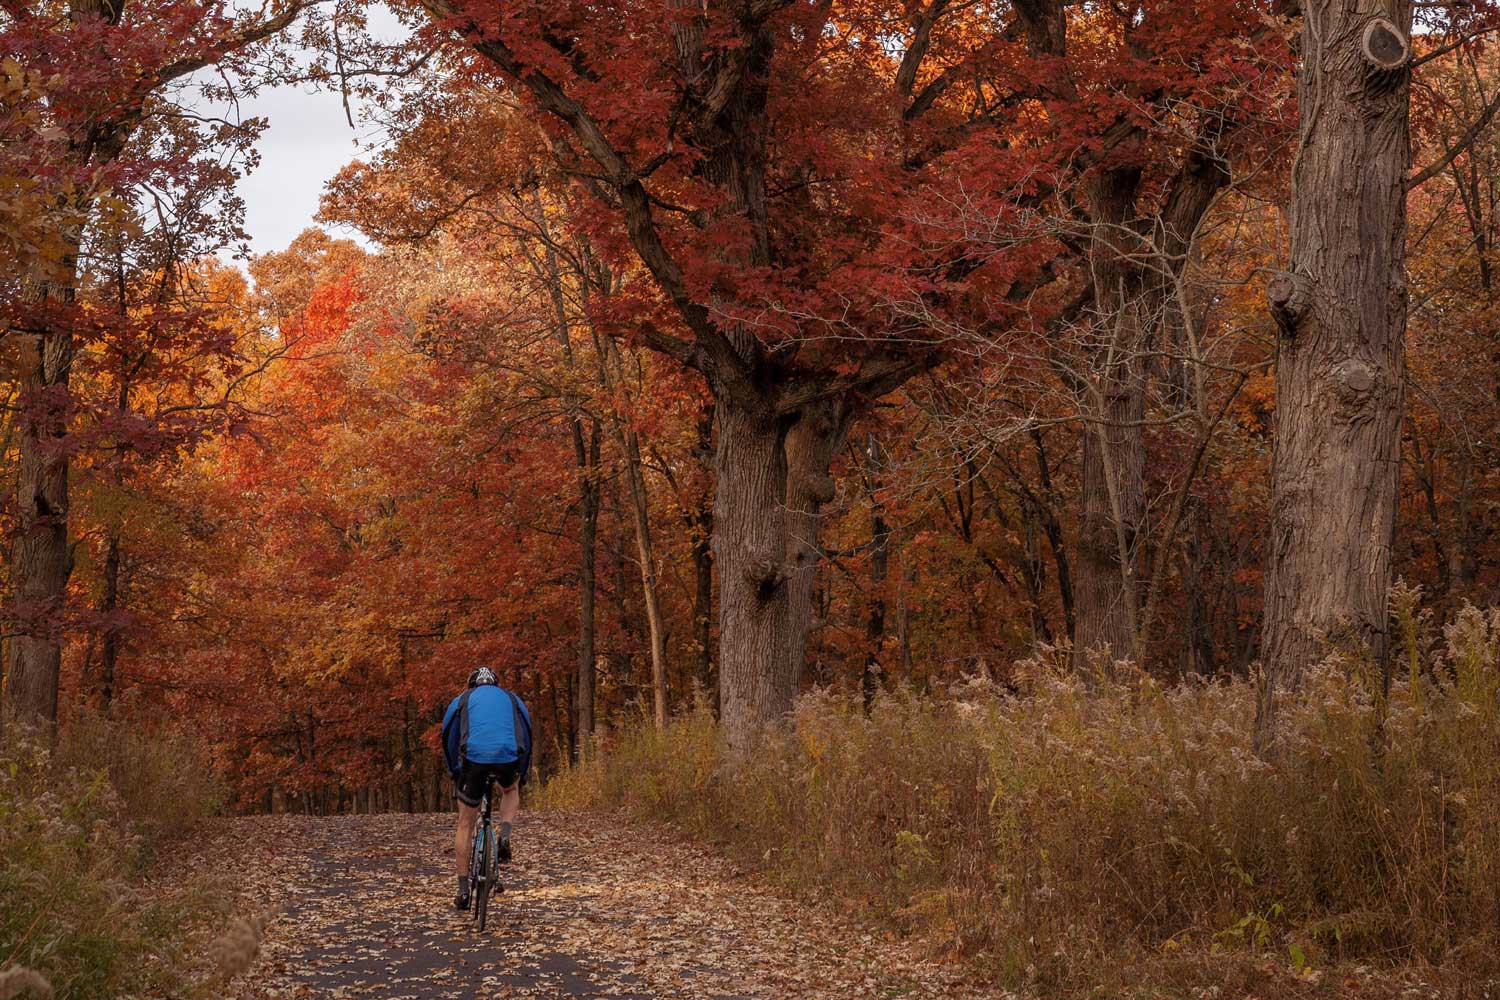 A bicyclist with an autumn forest in the background.